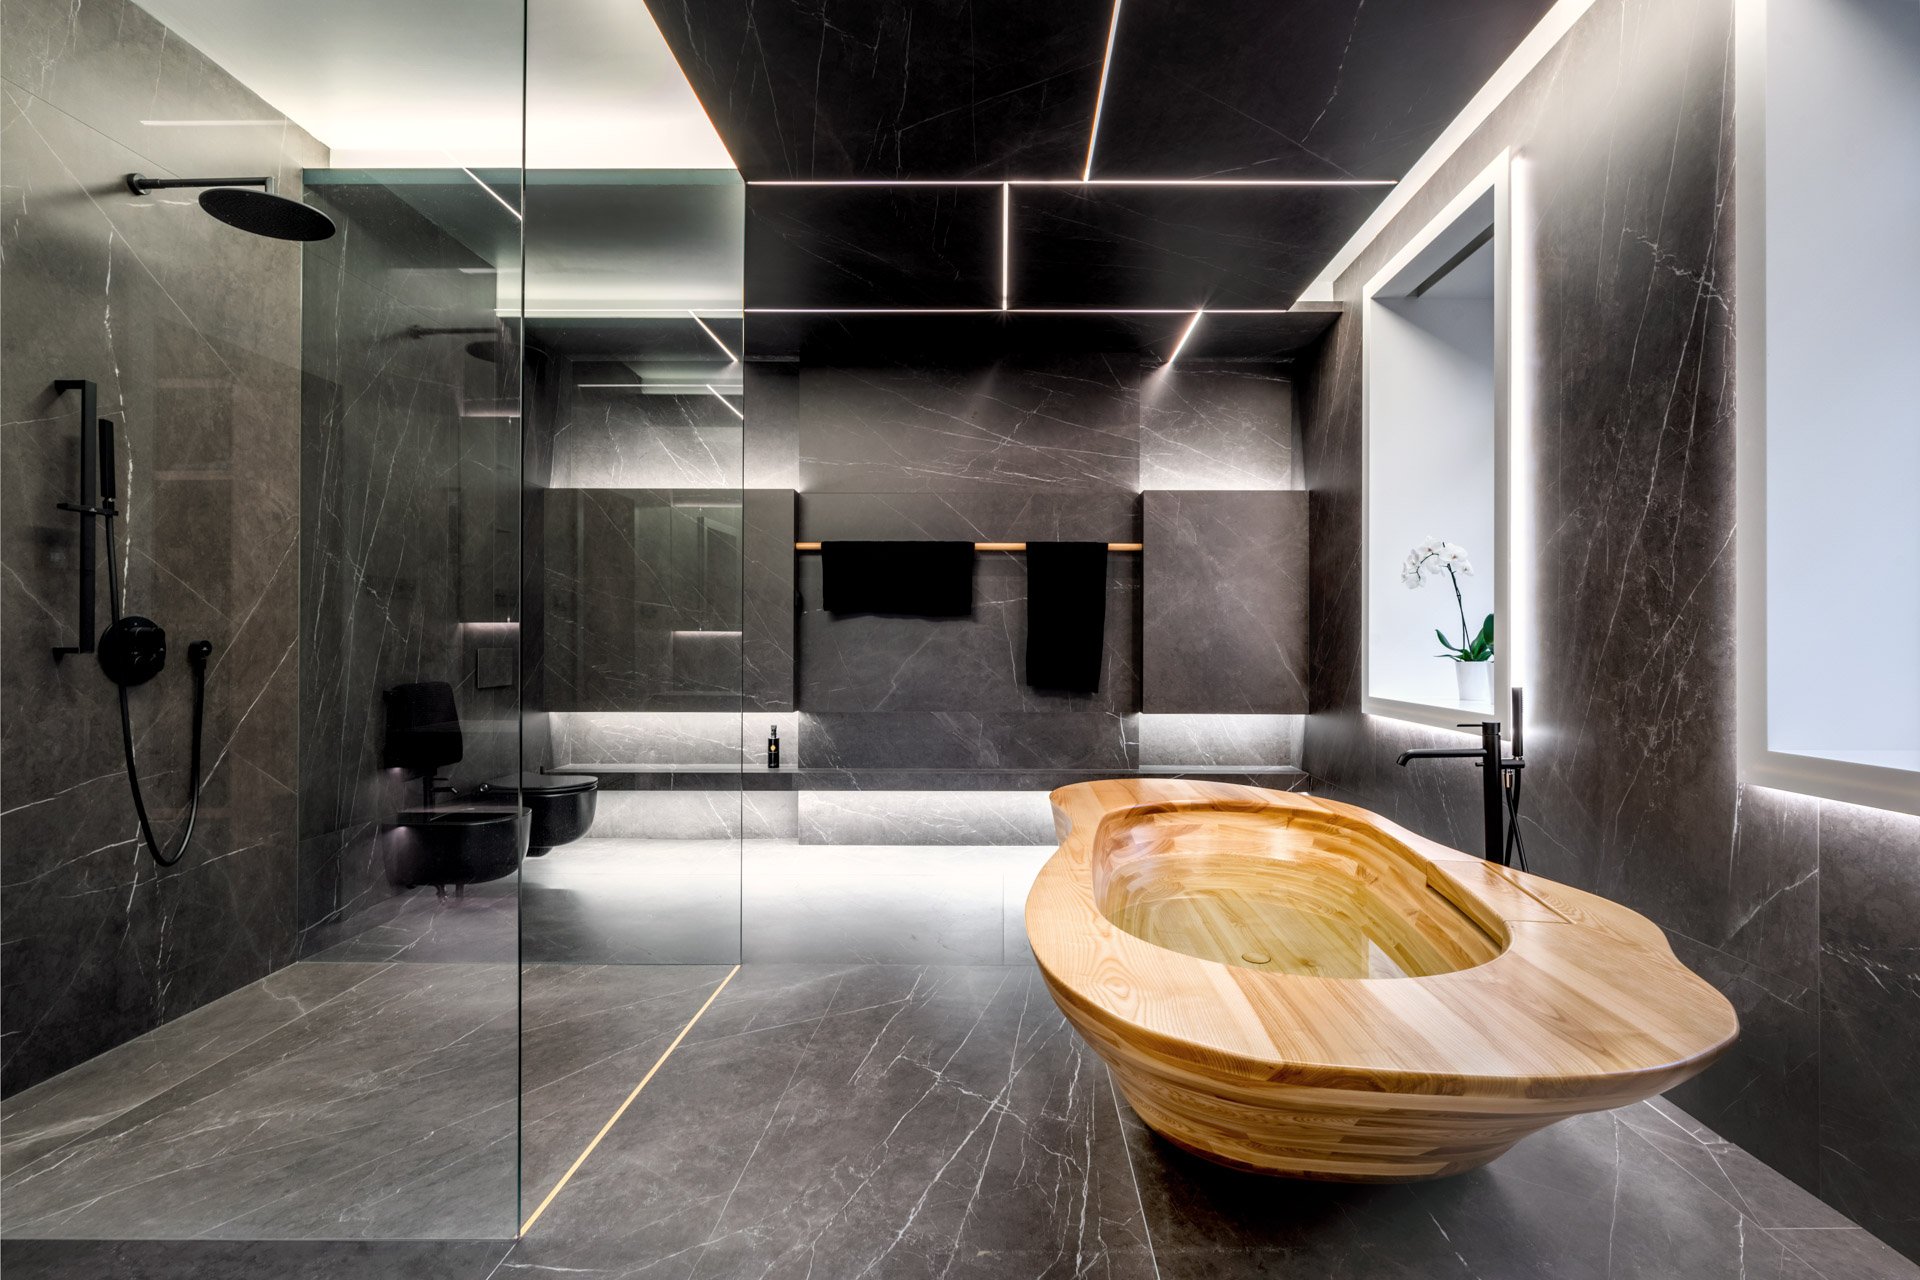 Image no. 1 of Custom bathtub and washbasin crafted in Ash wood - Defacto